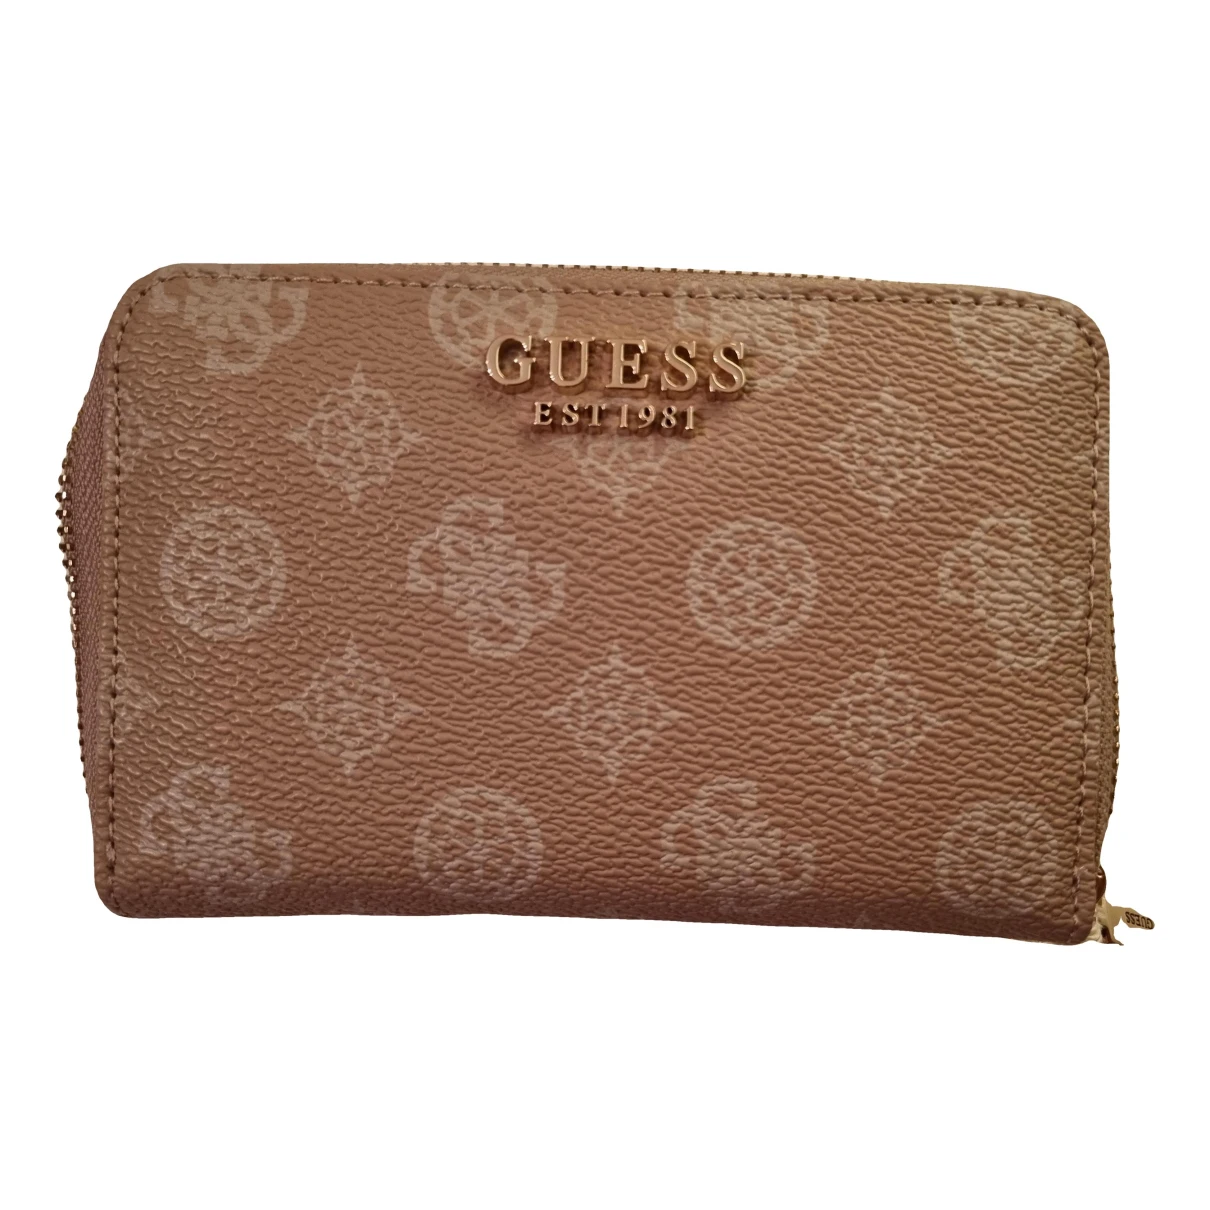 accessories Guess purses, wallets & cases for Female. Used condition